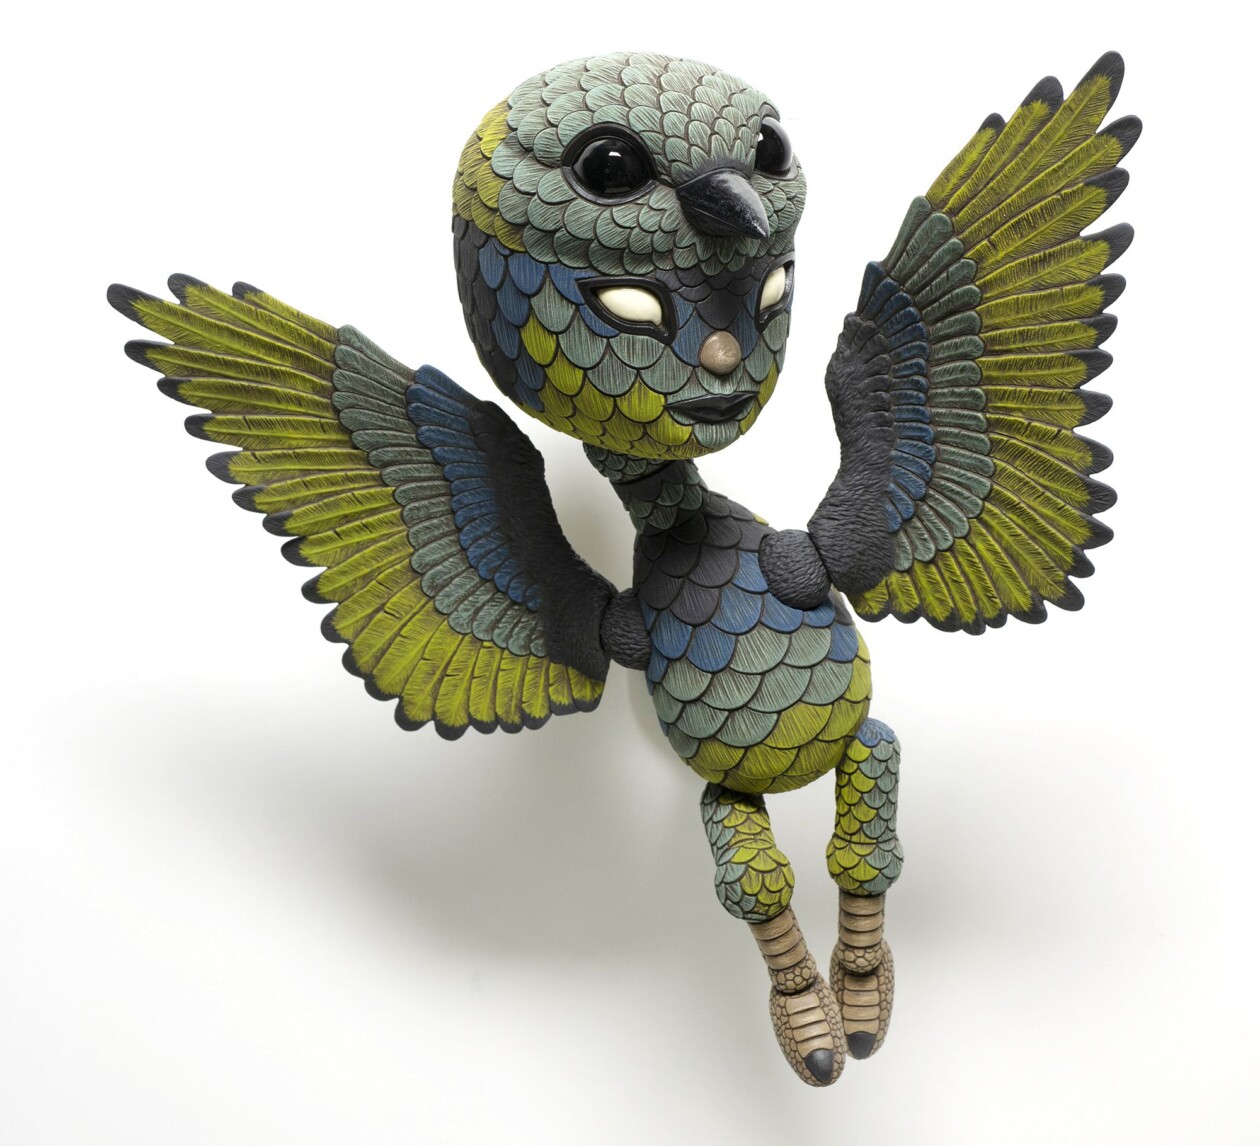 Marvelous Anthropomorphized Bird Sculptures By Calvin Ma (20)